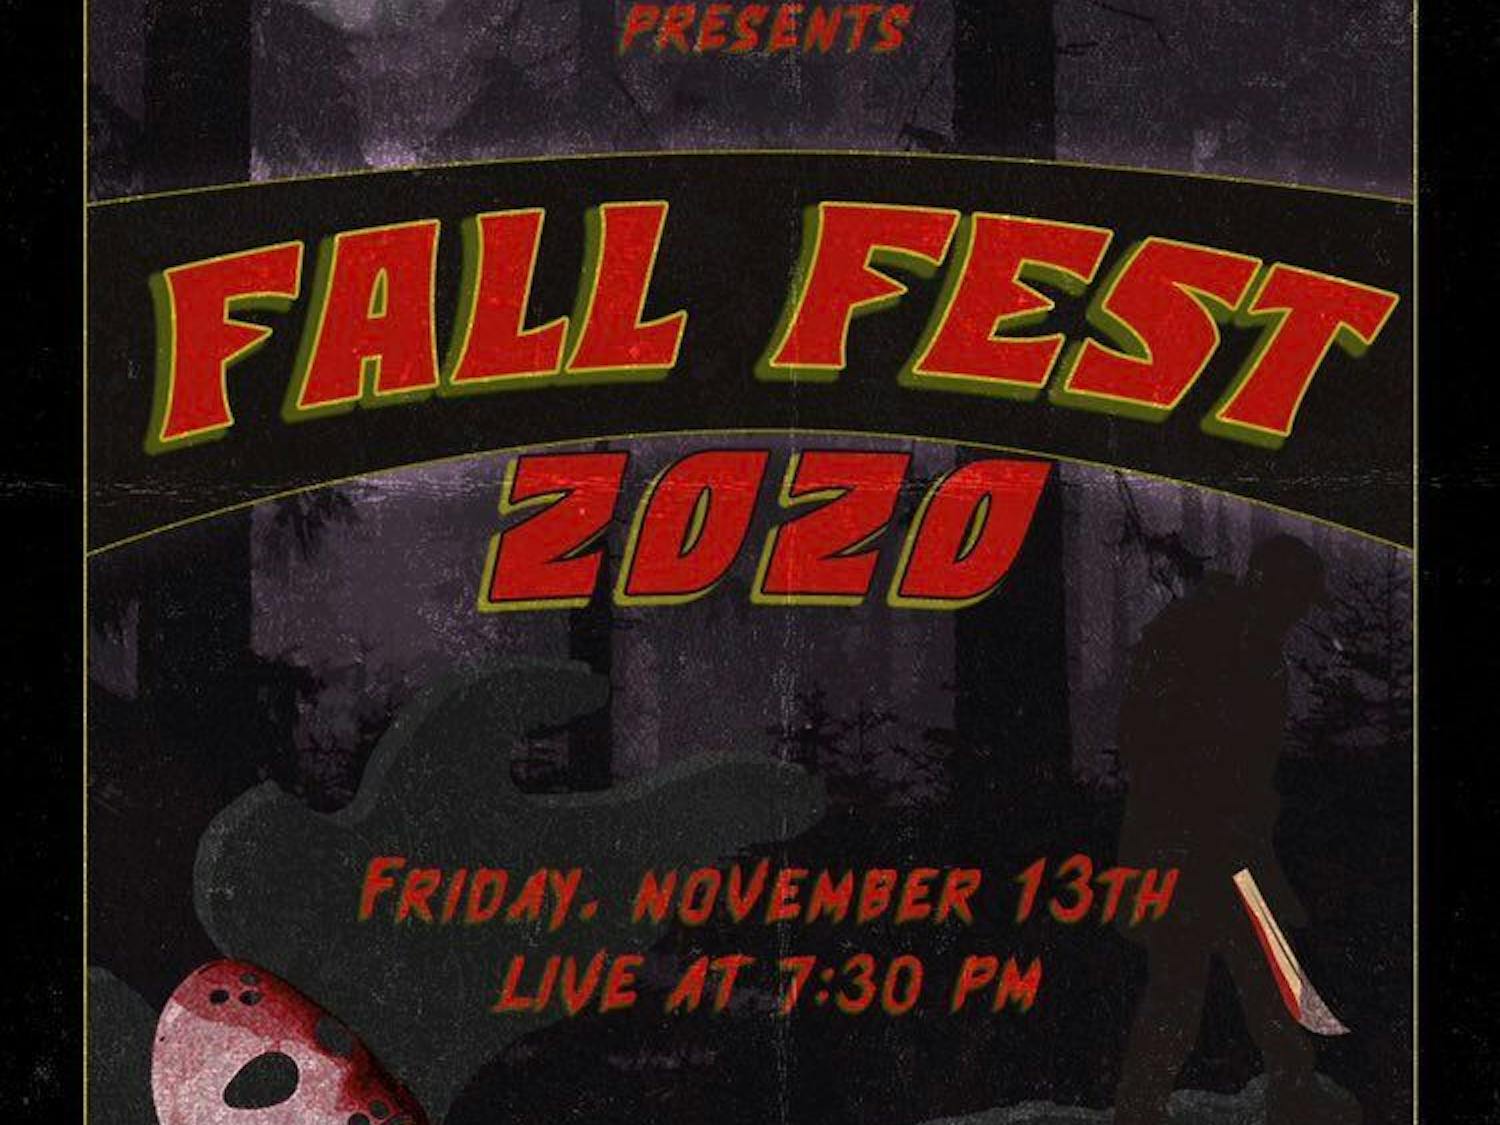 Swamp Records is set to host its annual Fall Fest Saturday at 7:30 p.m. The show will be live streamed via YouTube for the first time.&nbsp;